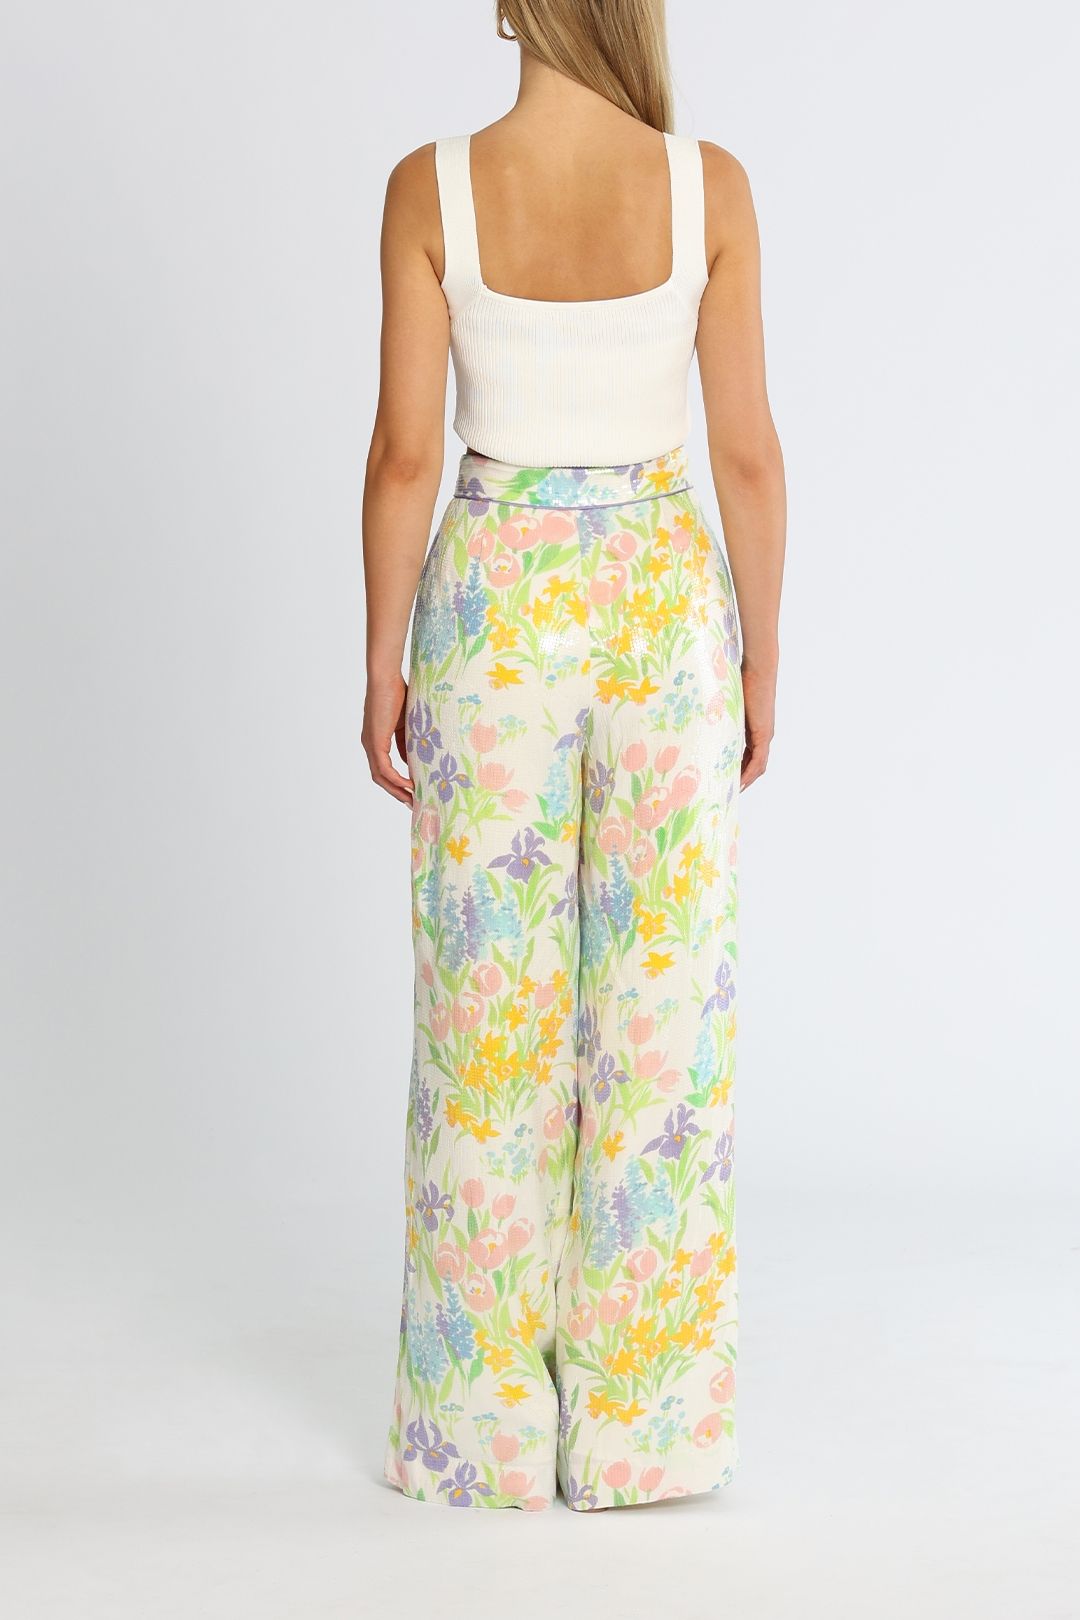 Alice McCall Love You Let's Go Pants Floral Long